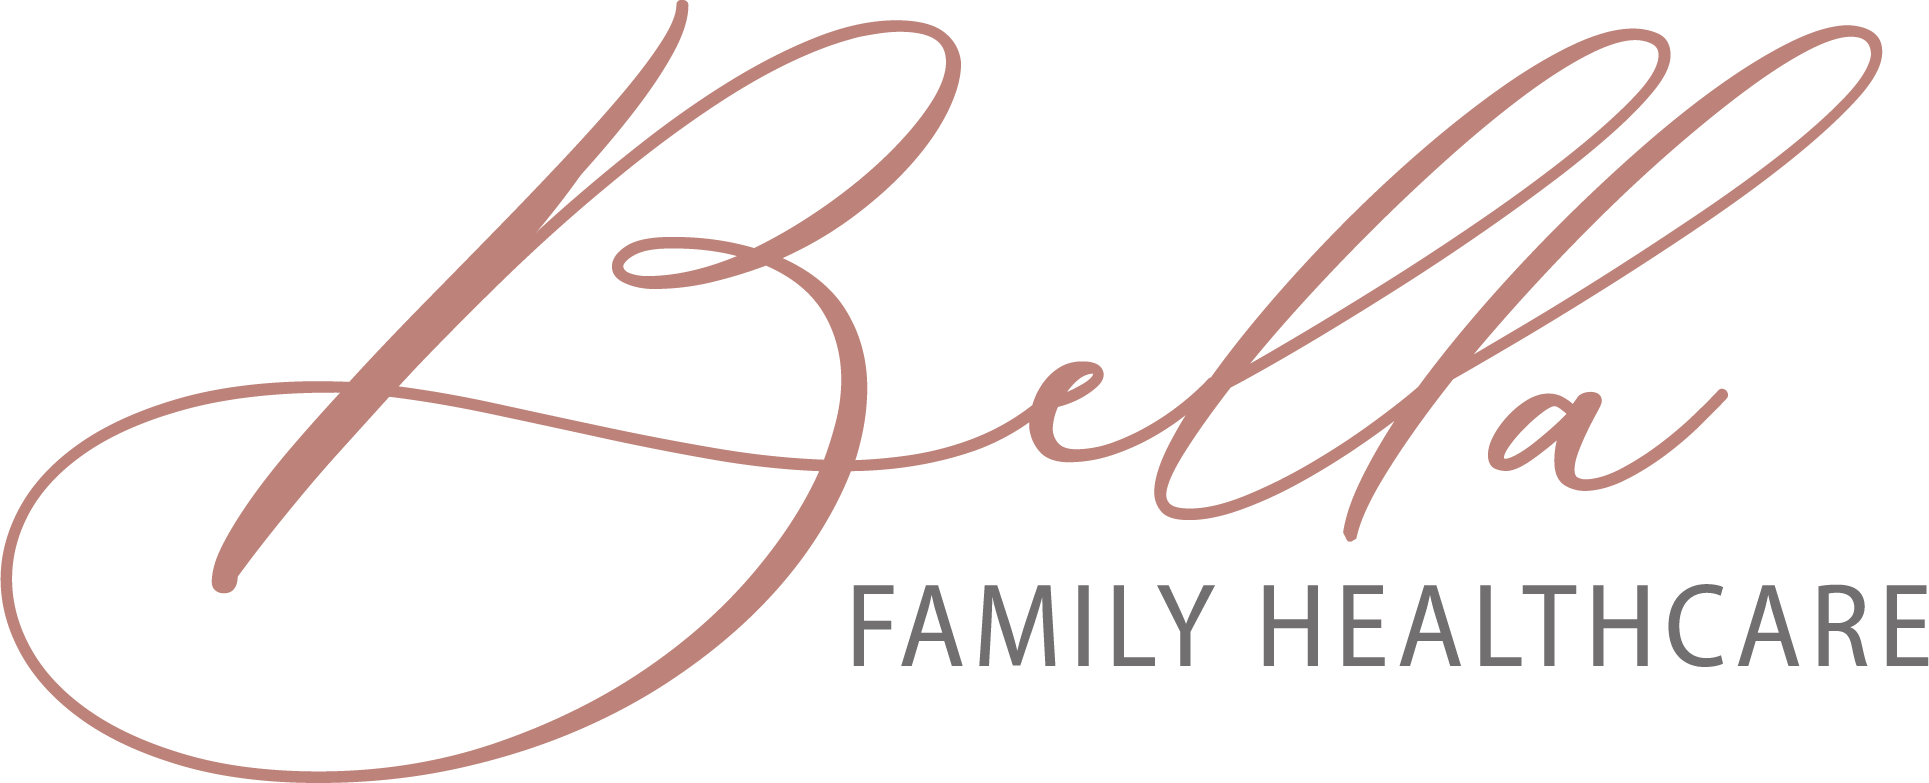 Bella Family Healthcare and Aesthetics